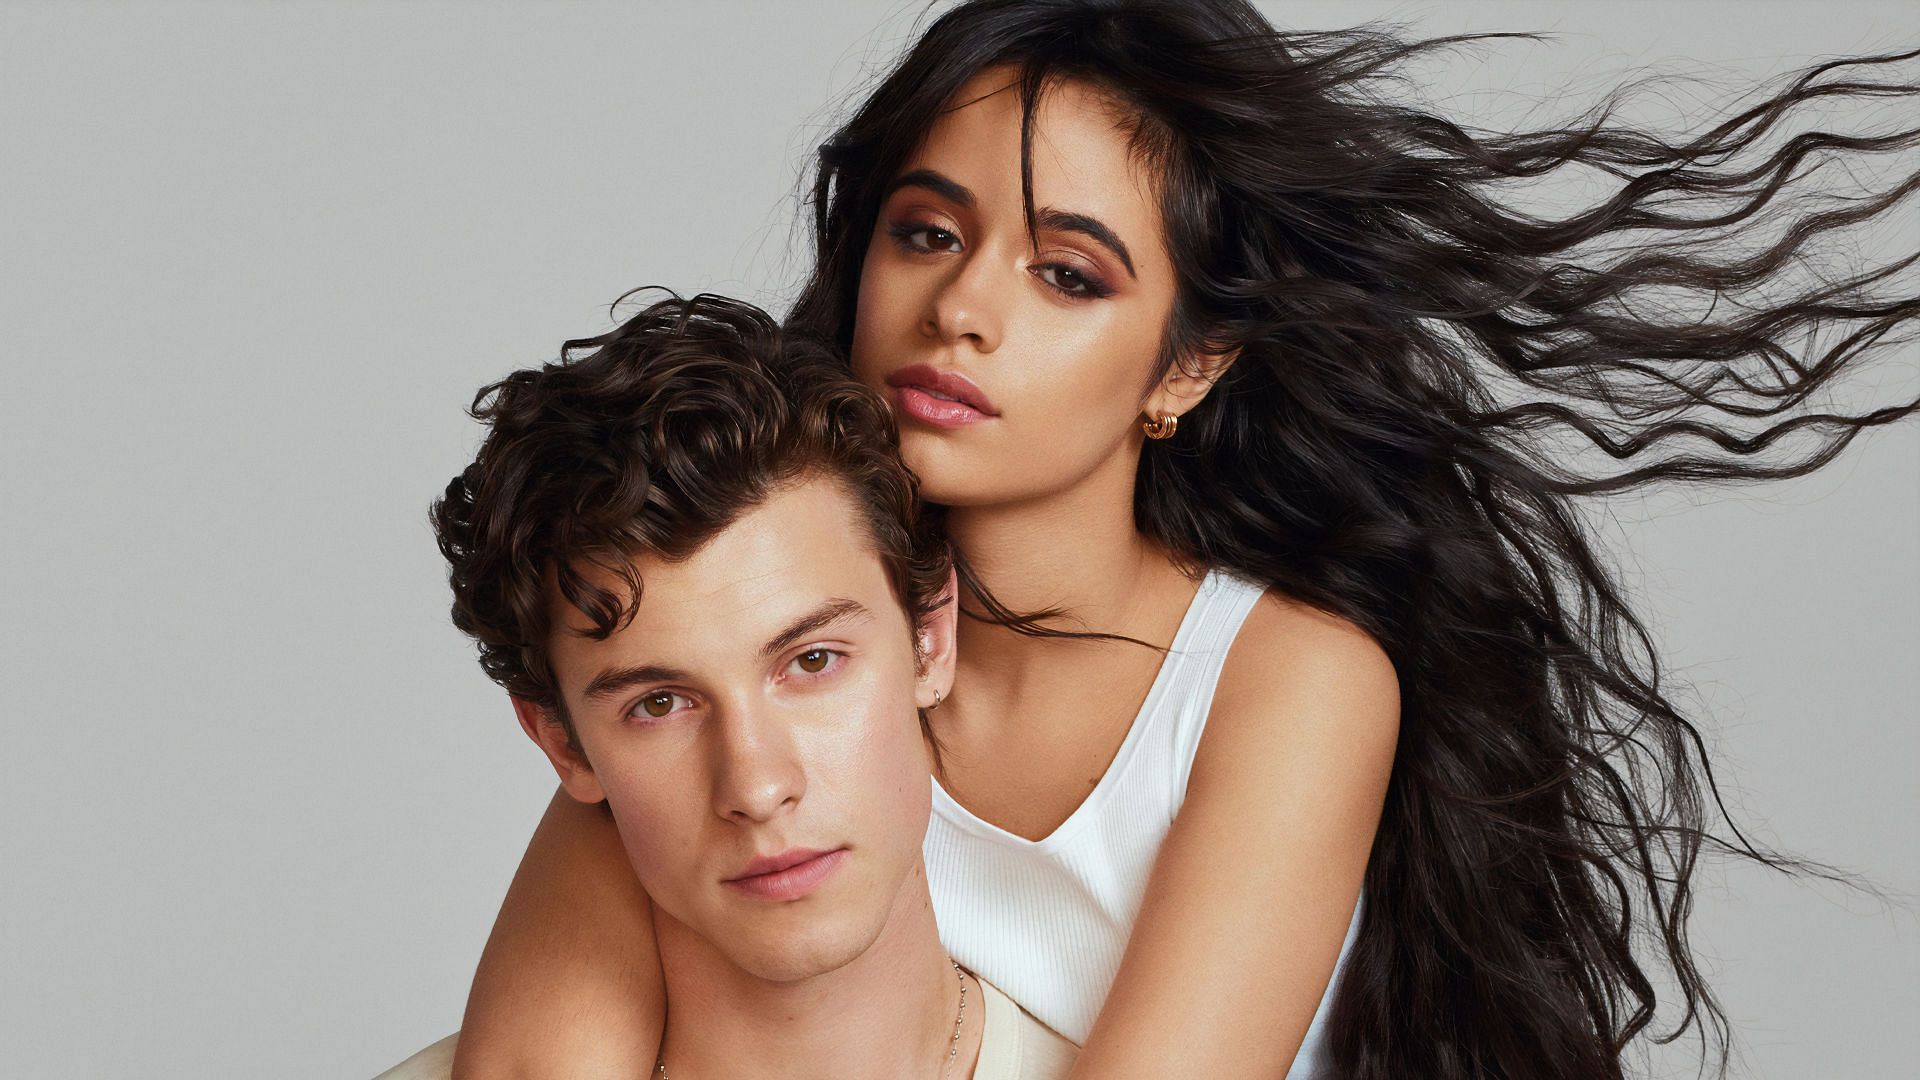 Shawn Mendes and Camila Cabello have parted ways after two years (Image via Getty Images)